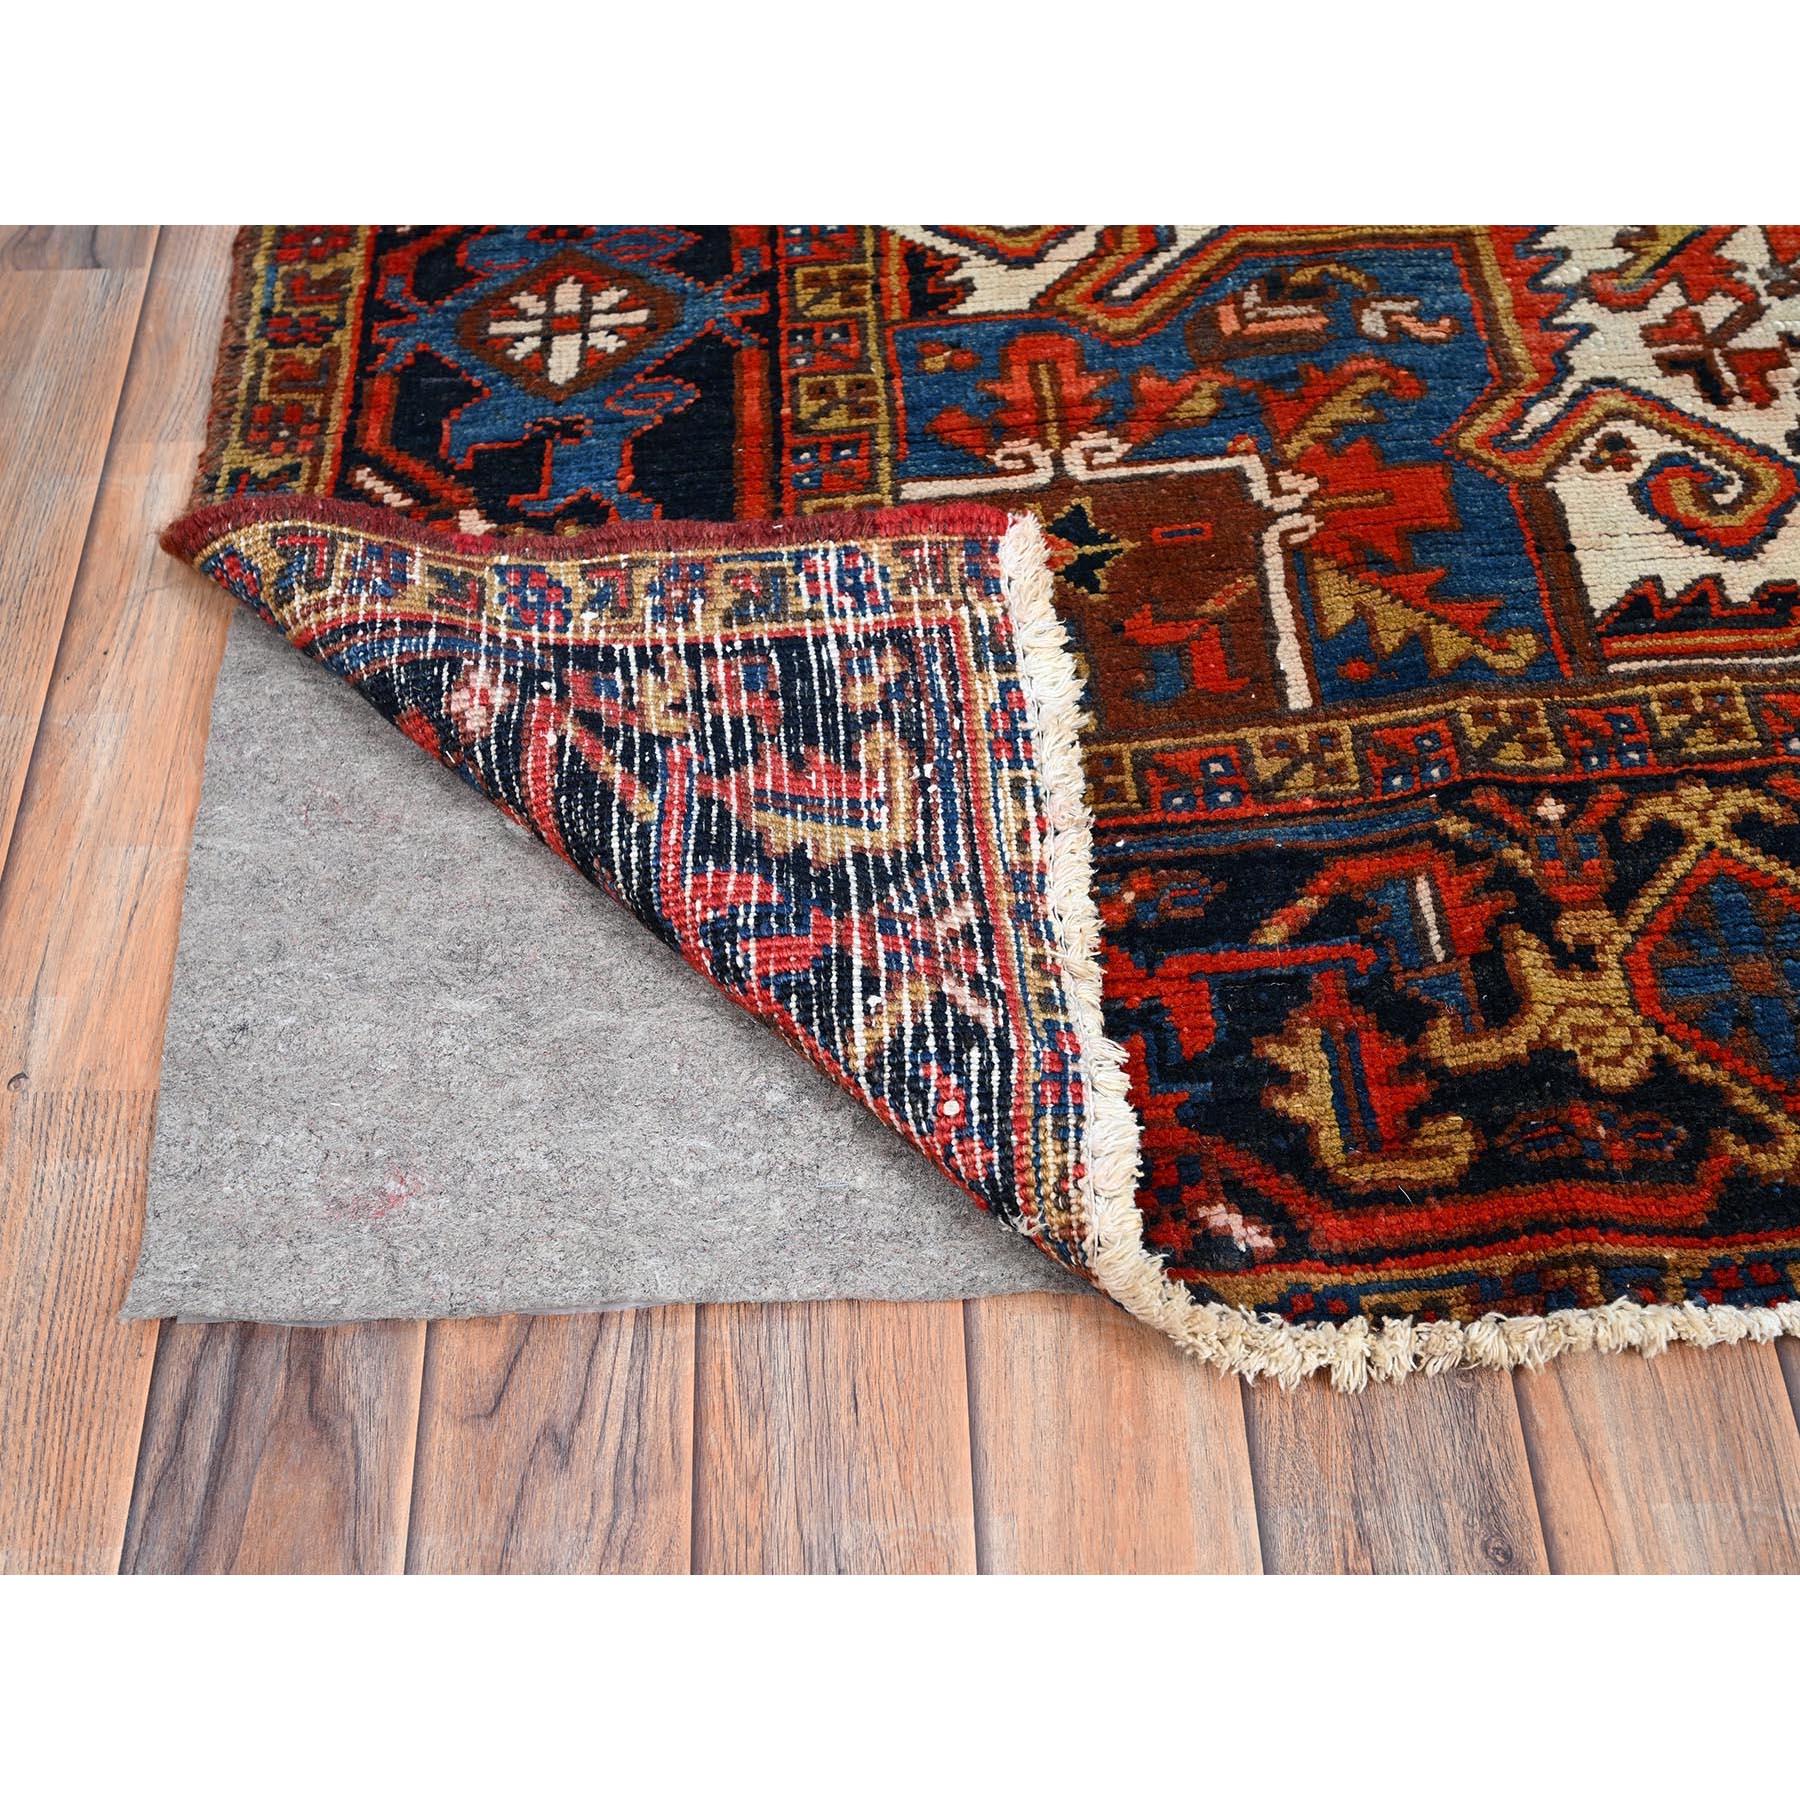 This fabulous Hand-Knotted carpet has been created and designed for extra strength and durability. This rug has been handcrafted for weeks in the traditional method that is used to make
Exact Rug Size in Feet and Inches : 7'7